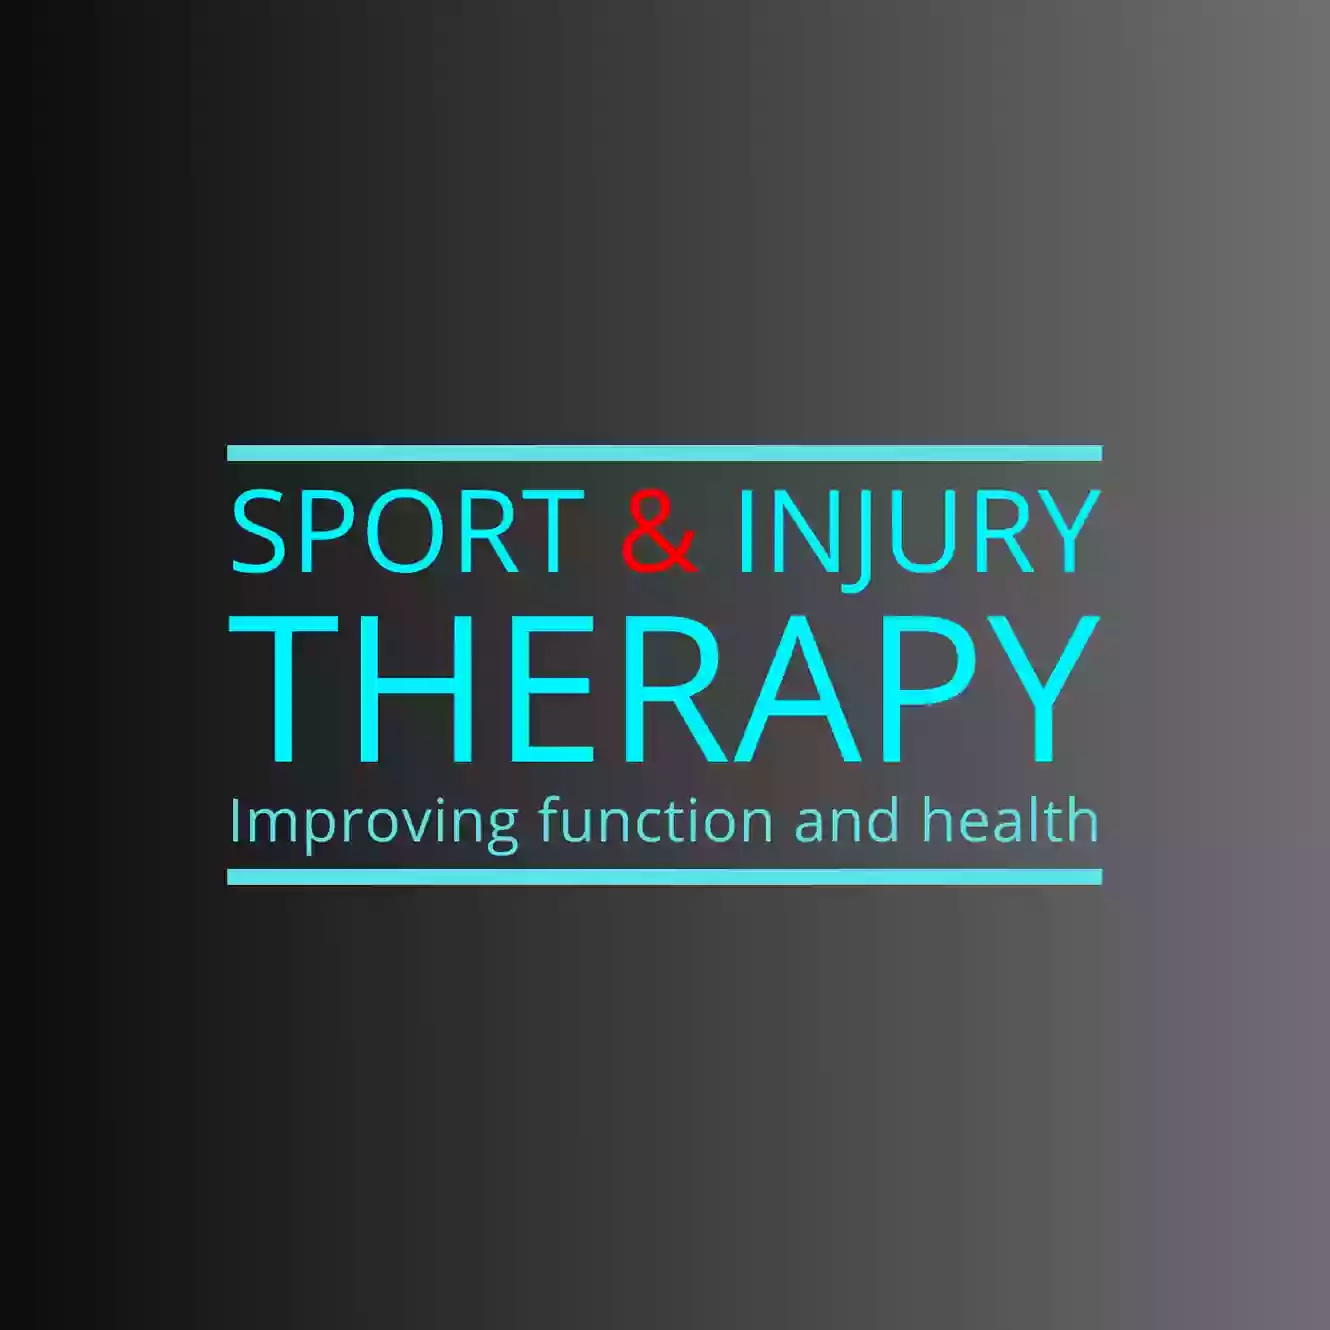 Sport & Injury Therapy